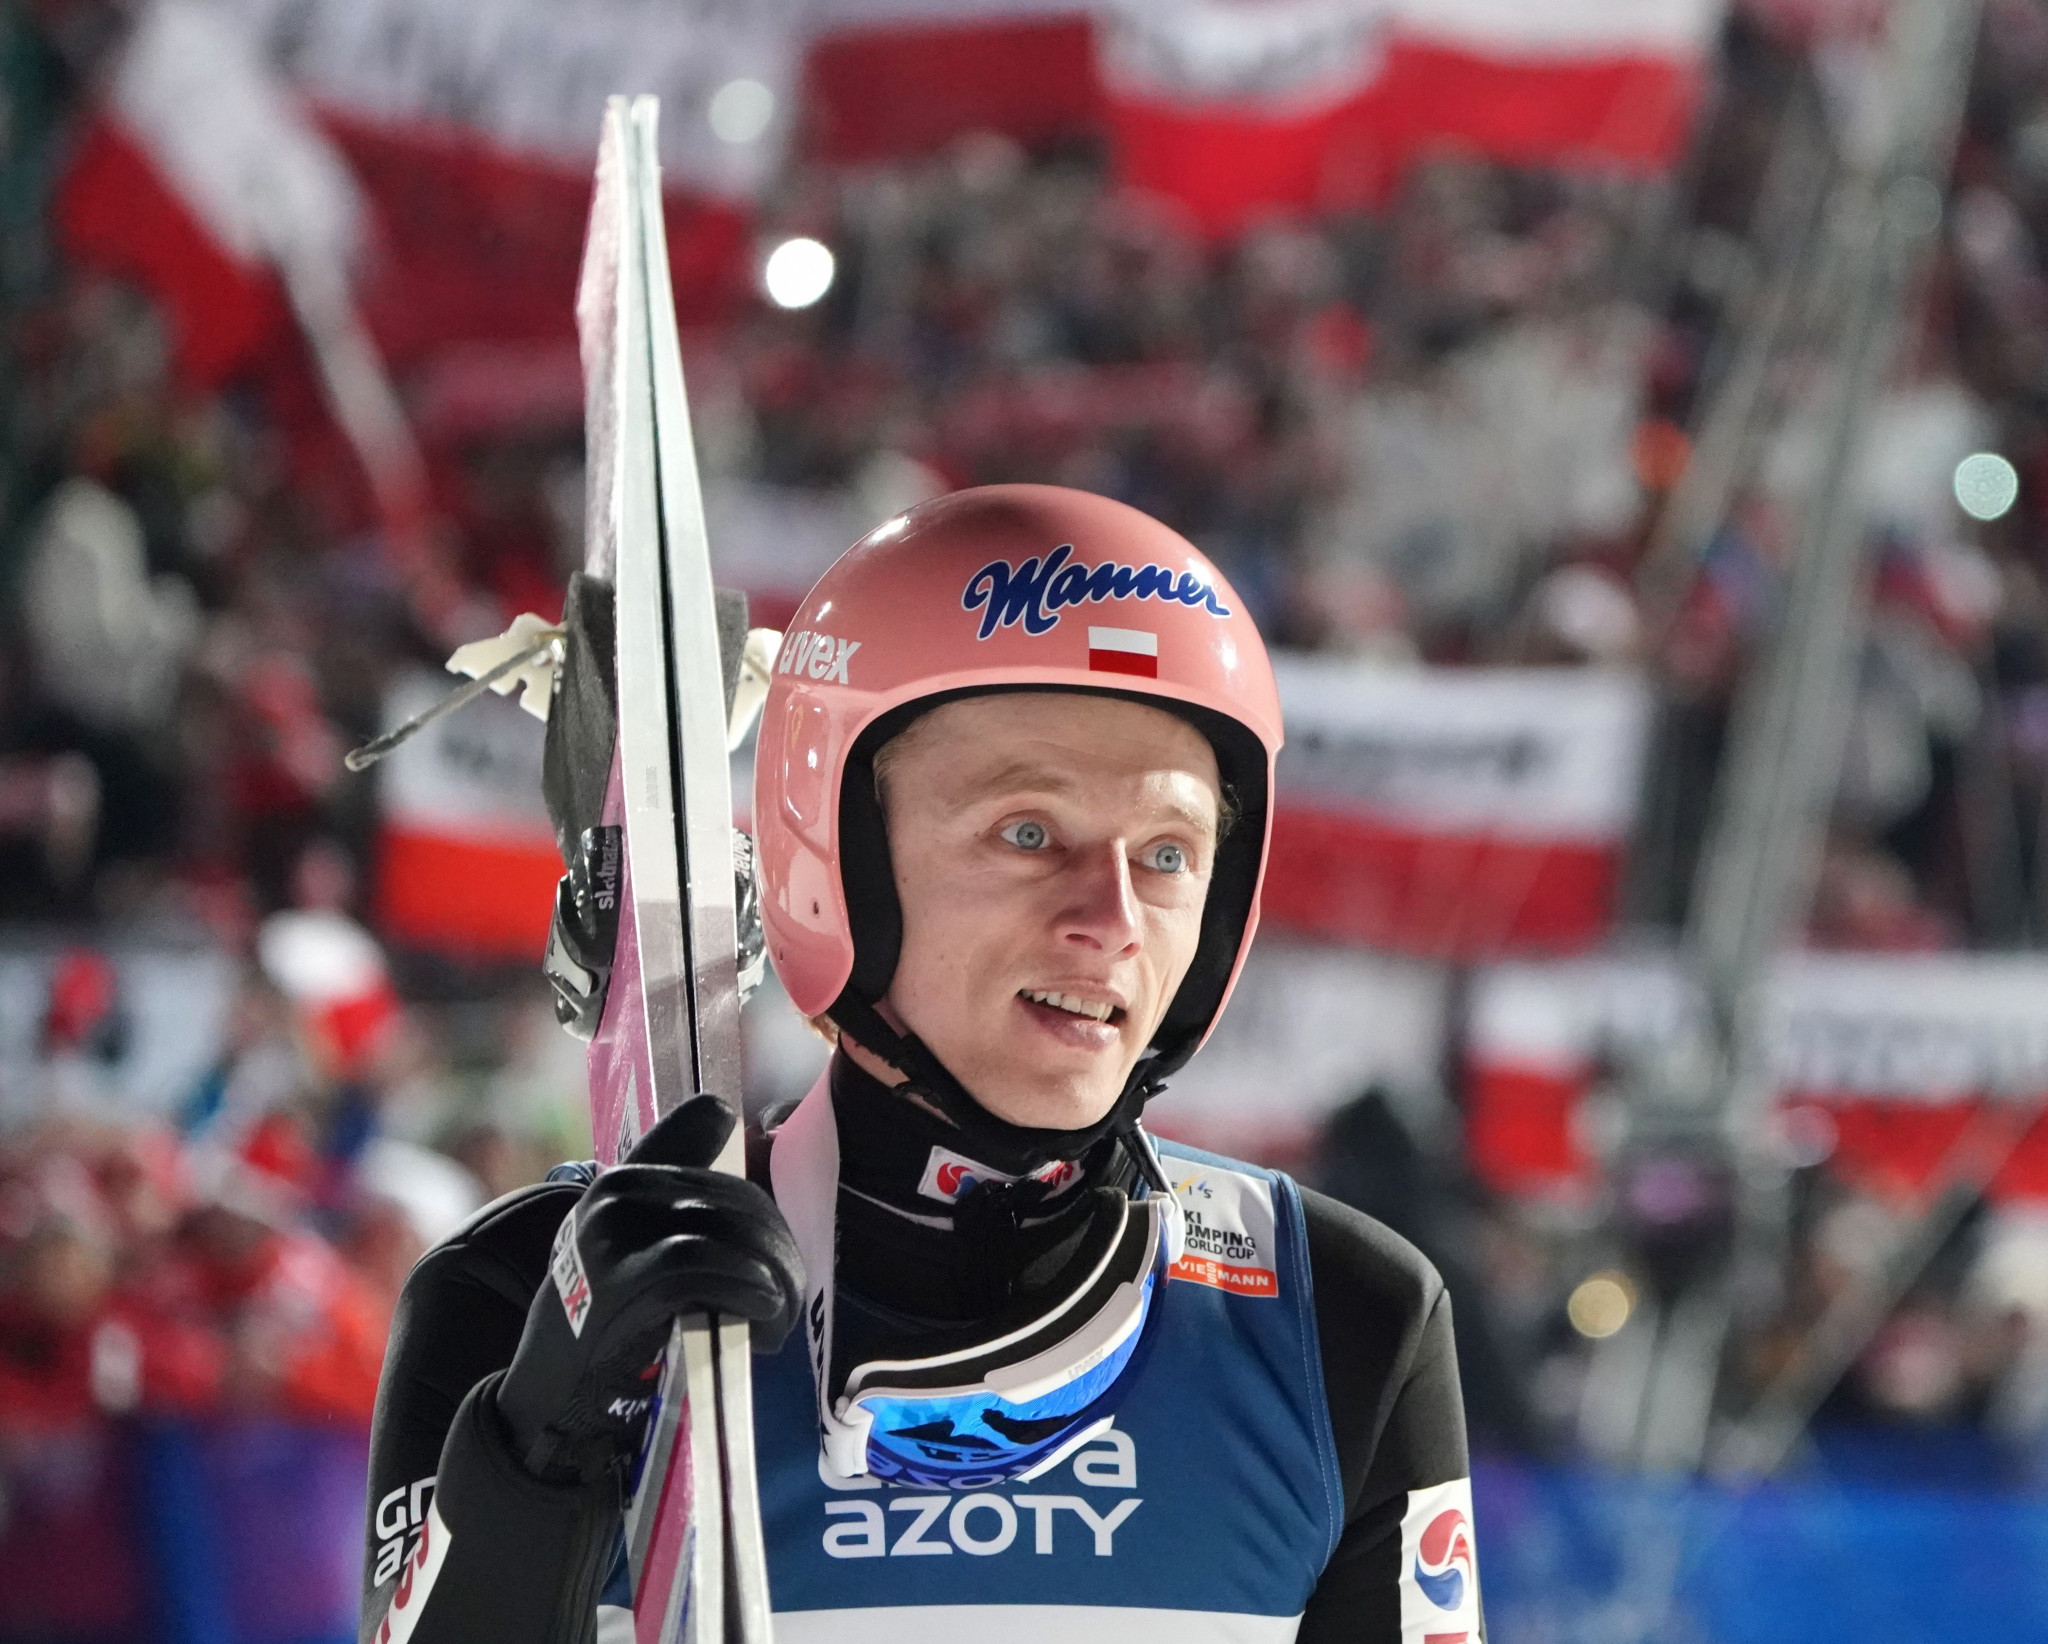 Dawid Kubacki provided further delight for the home crowd at the FIS Ski Jumping World Cup event in Zakopane, finishing third ©Getty Images